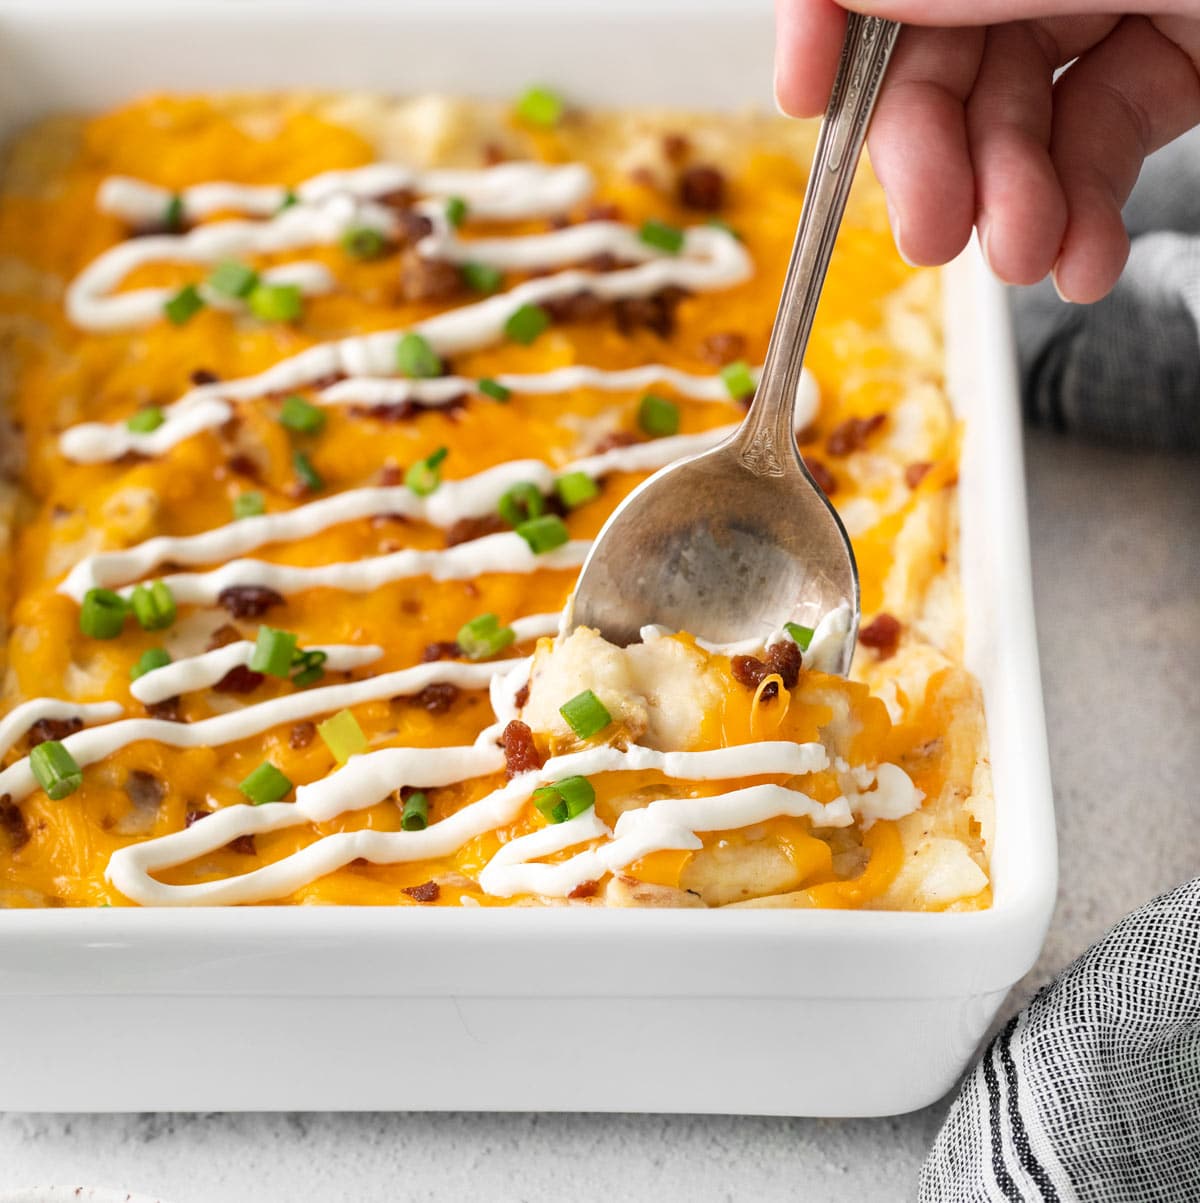 a spoon scooping out some of the potato casserole.